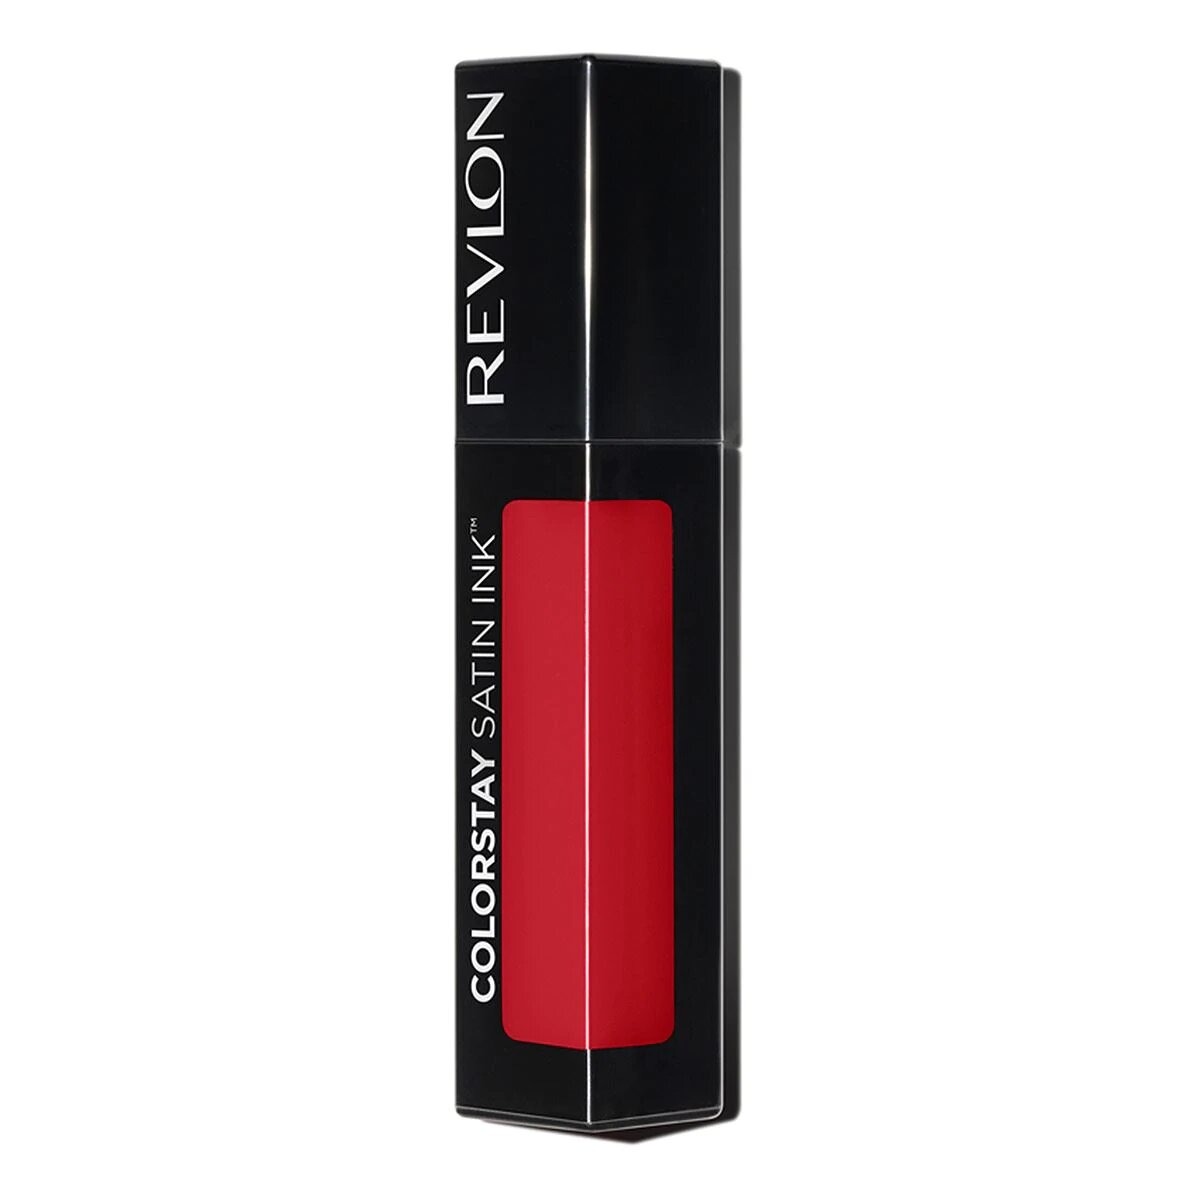 LABIAL LIQUIDO COLORSTAY SATIN INK FIRE AND ICE - REVLON